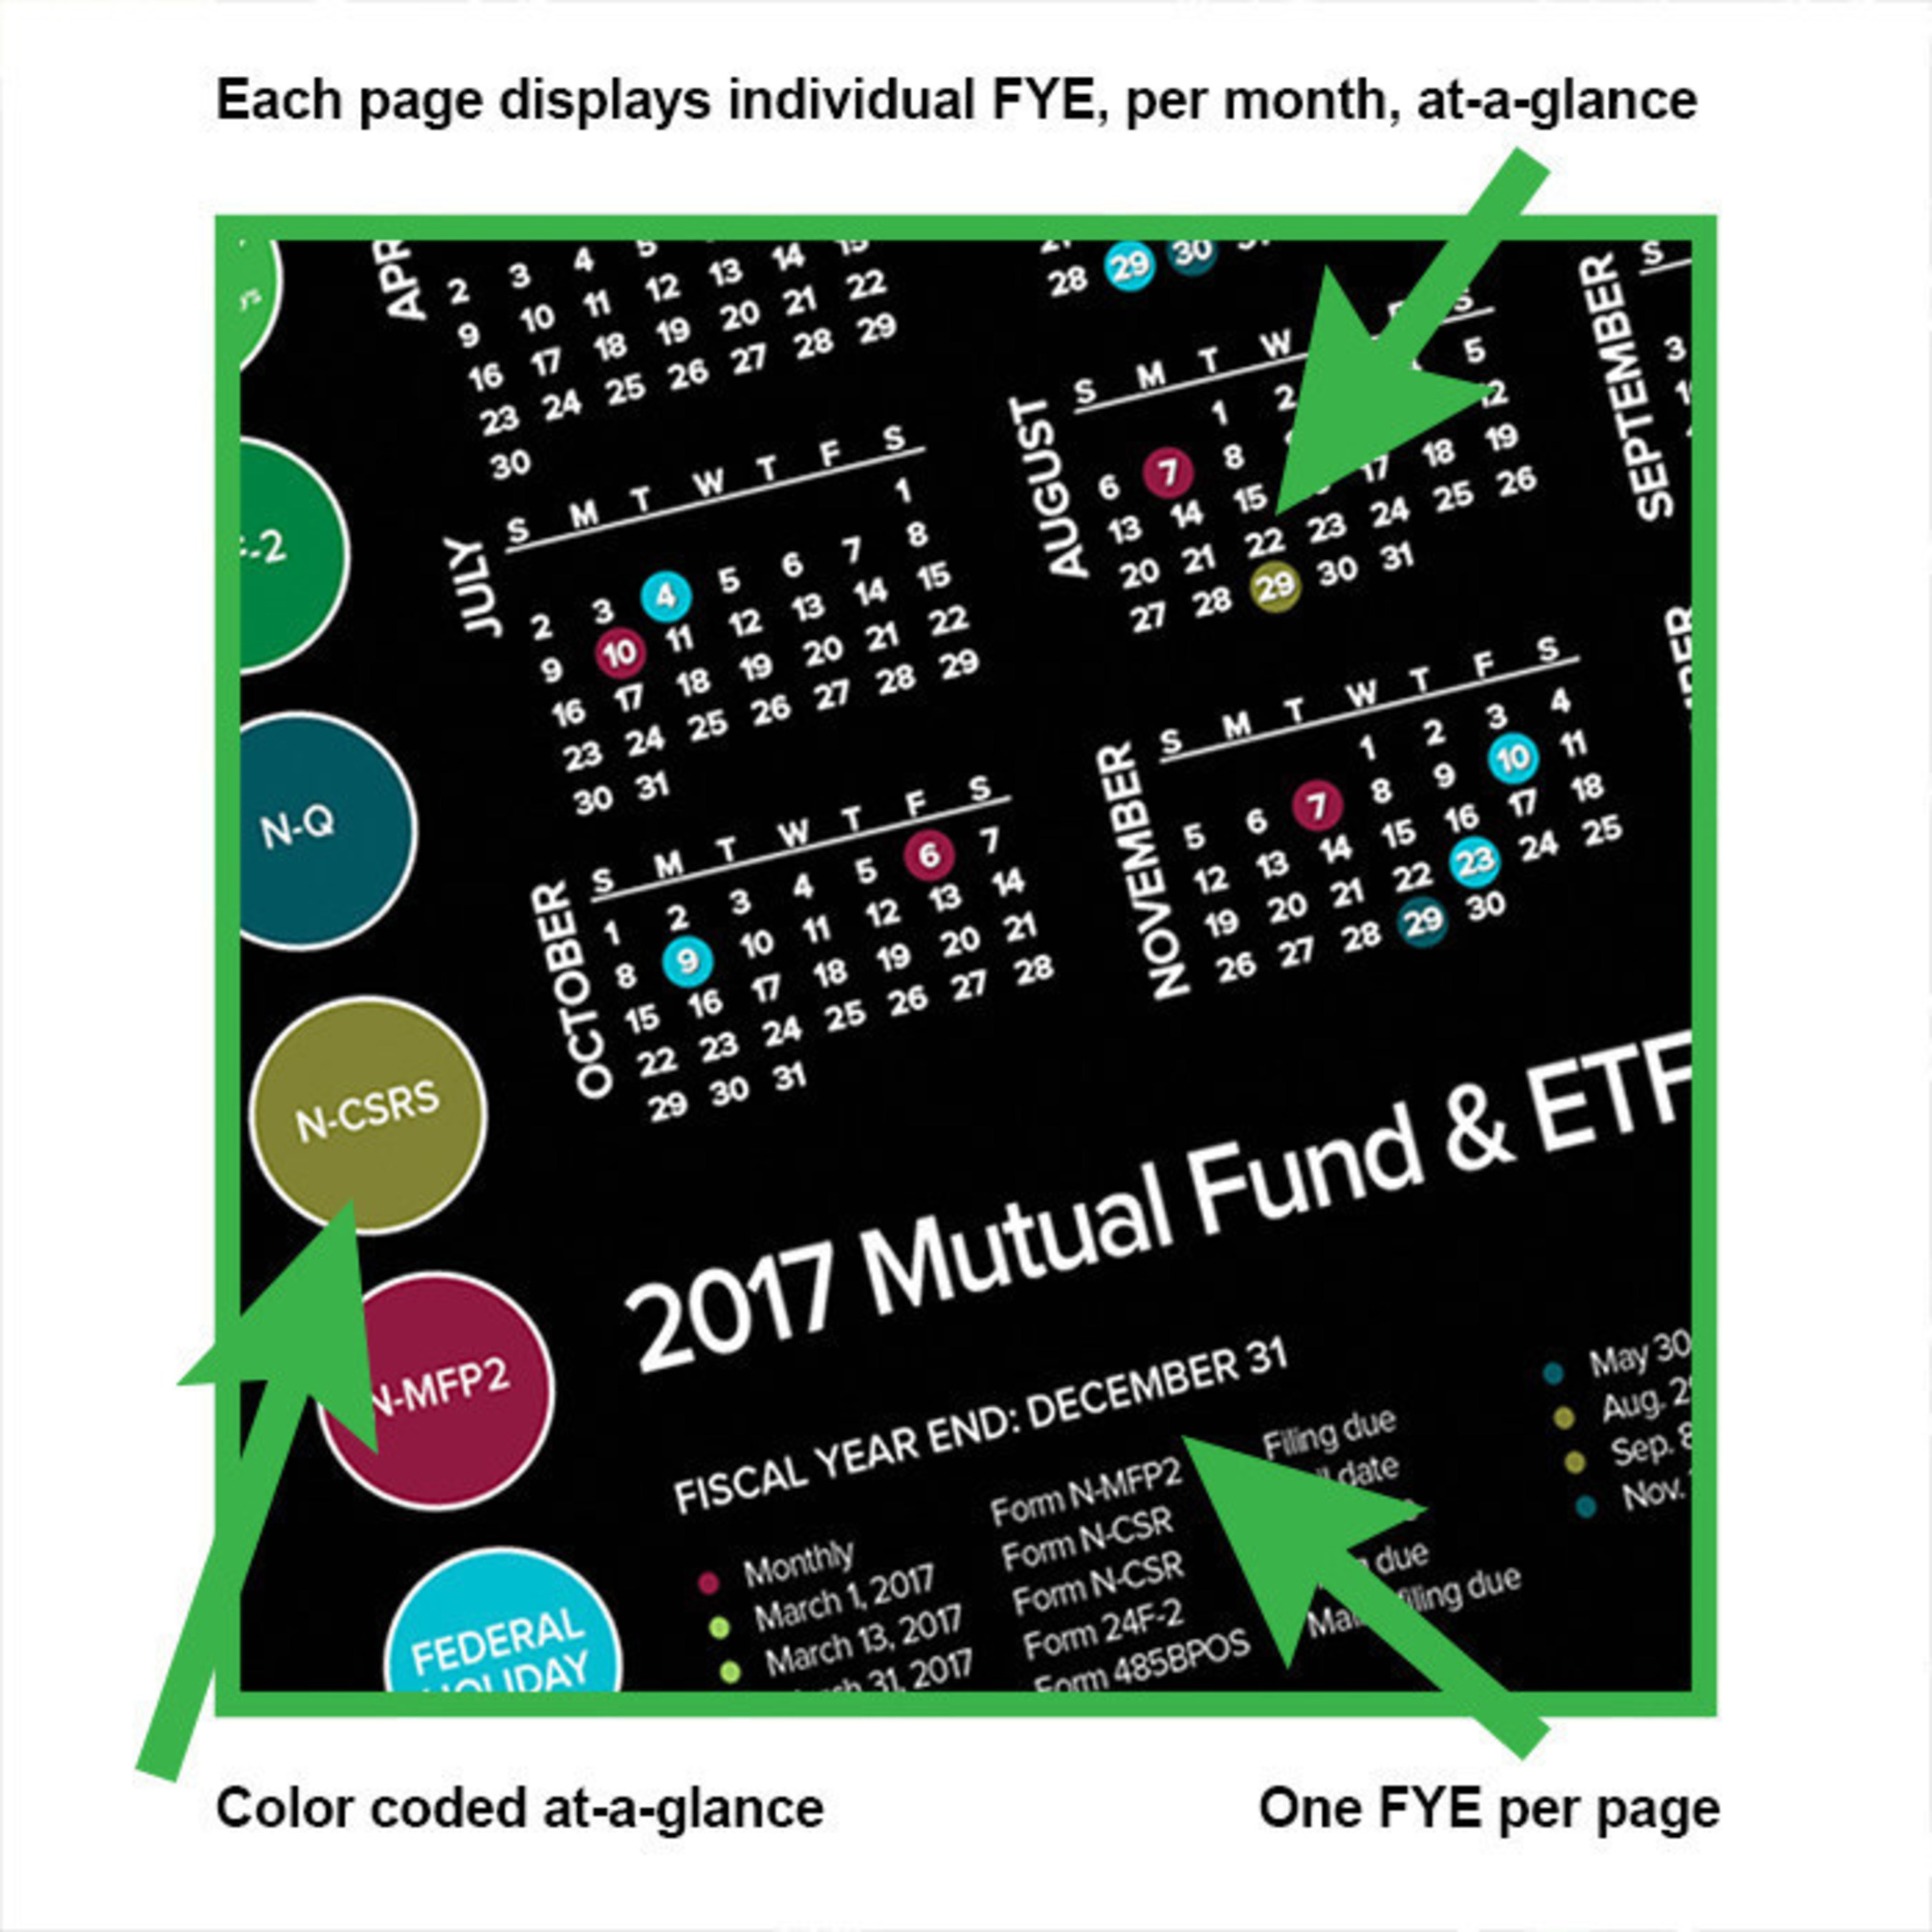 2017 Mutual Fund & ETF Filings Dates Calendar Available both as digital and printed 12-month hardcopy for your bulletin board.